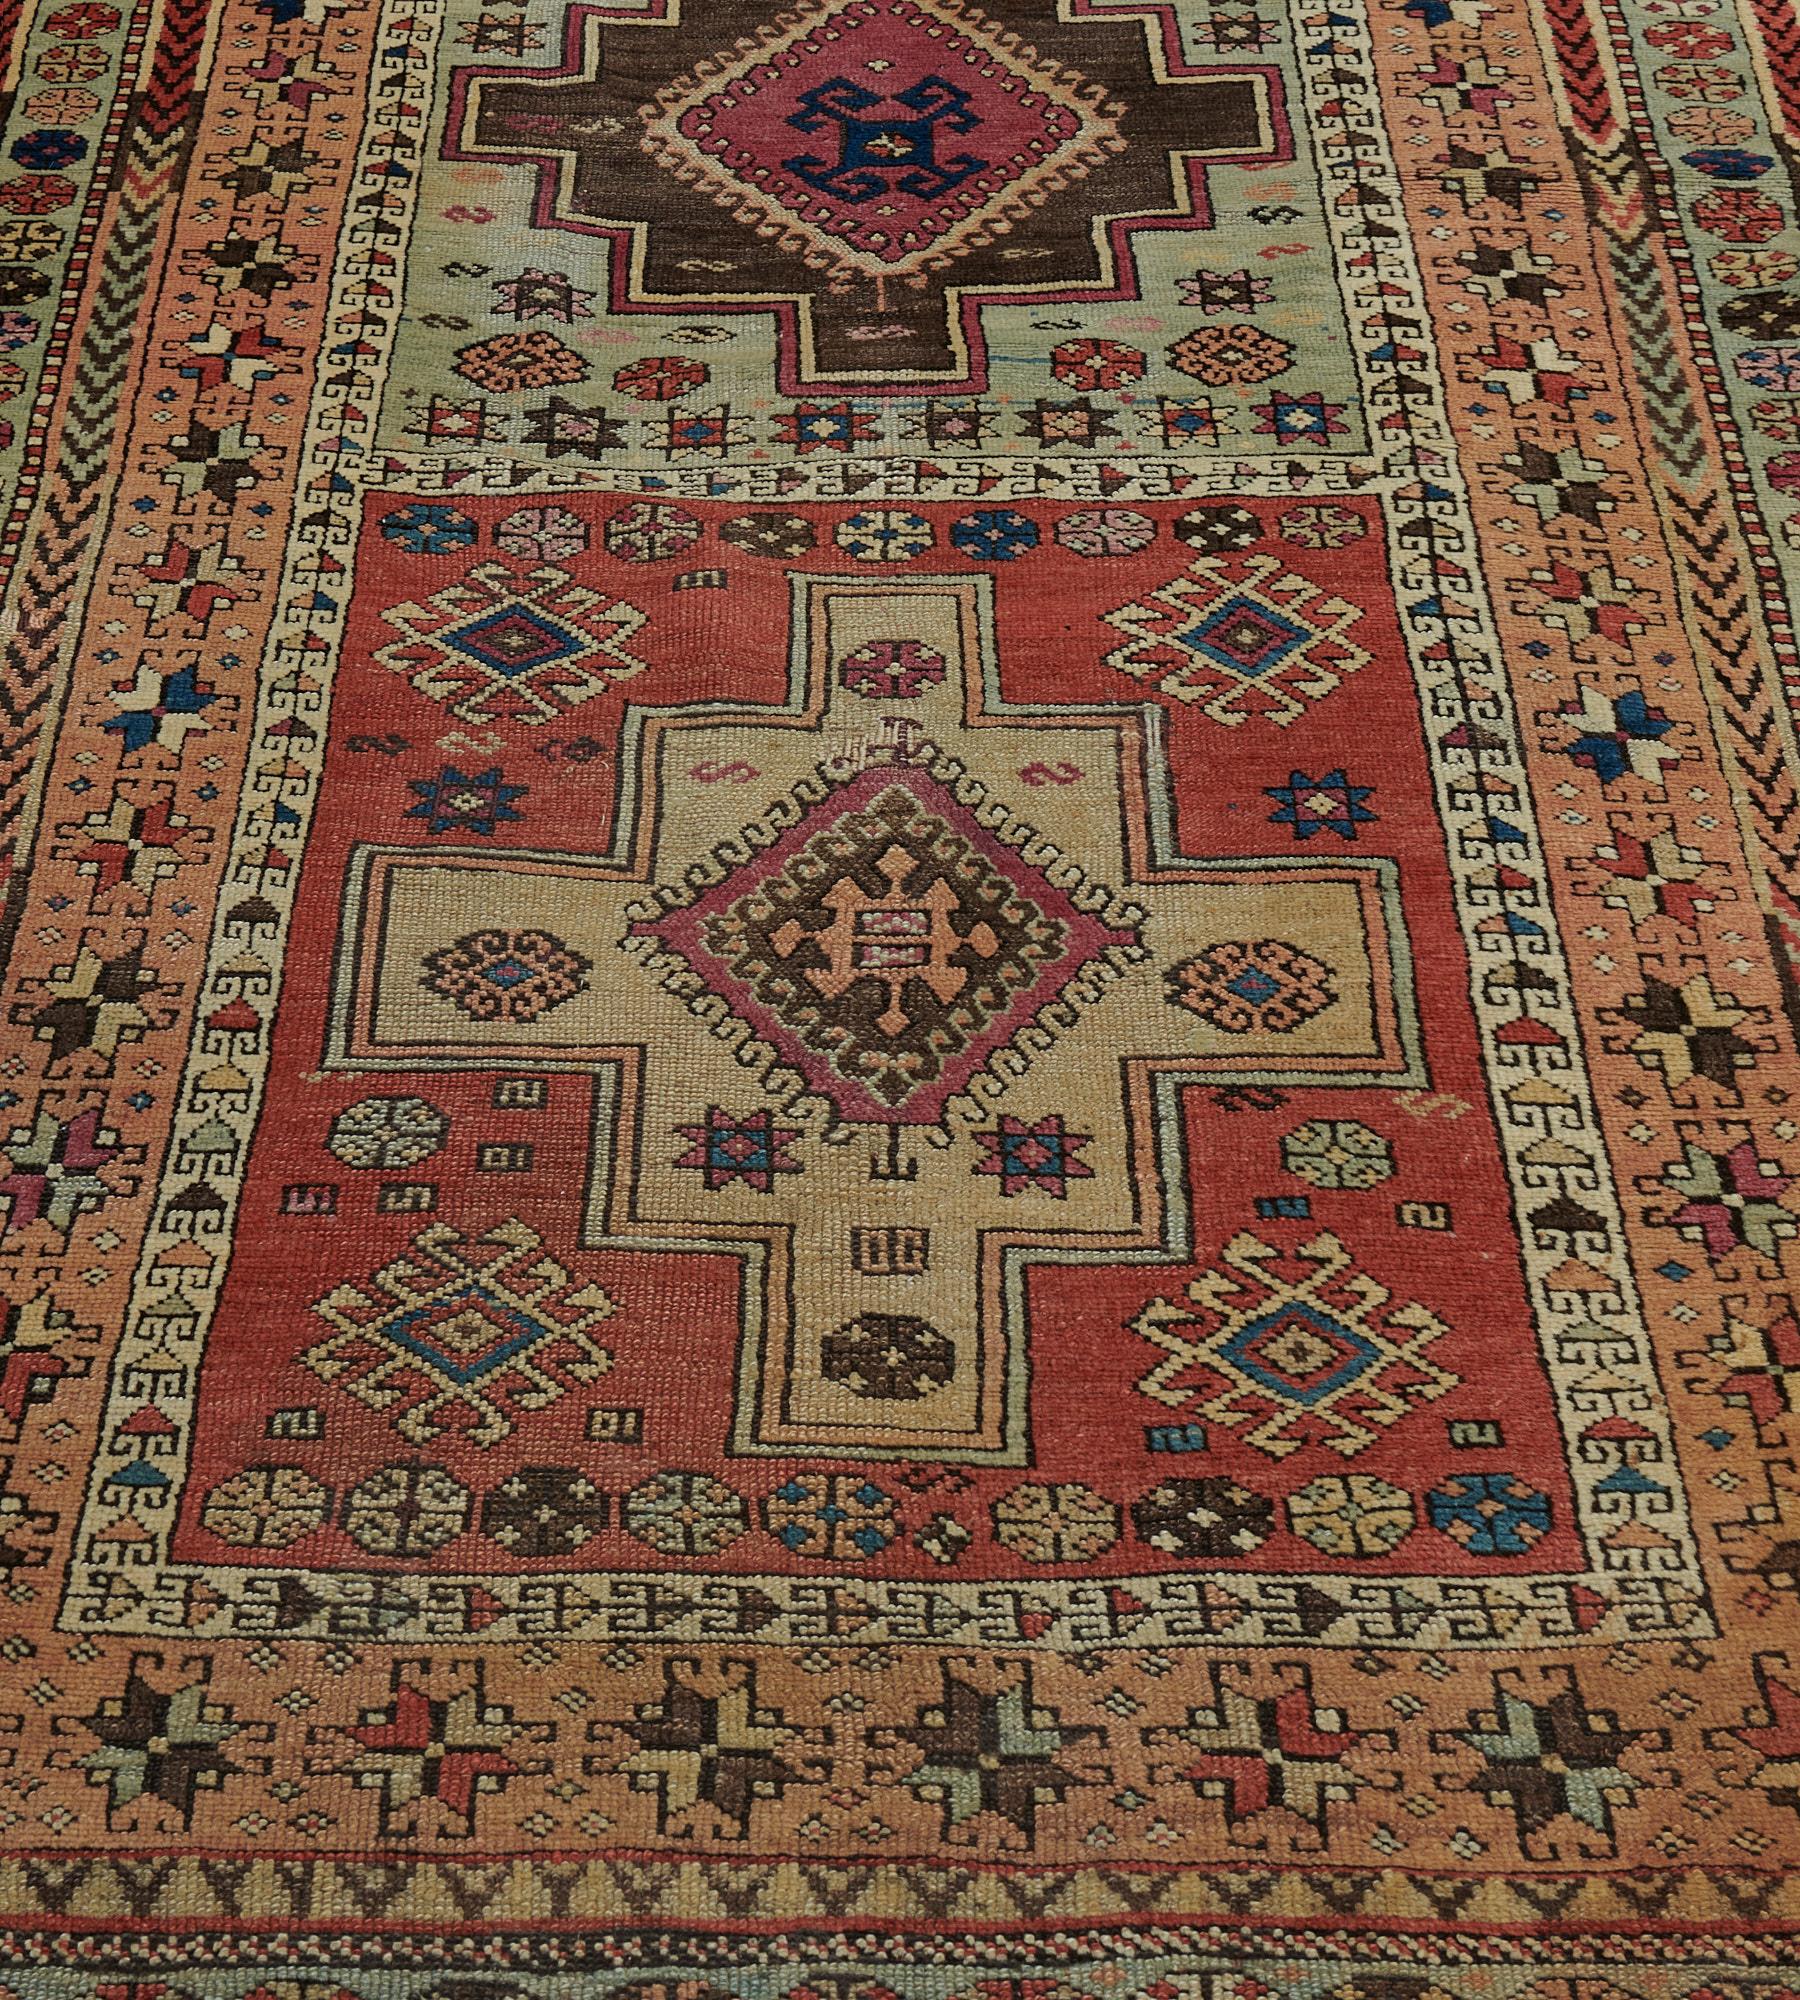 Antique Hand-Knotted Wool Traditional Karabagh Runner, c. 1880 For Sale 5